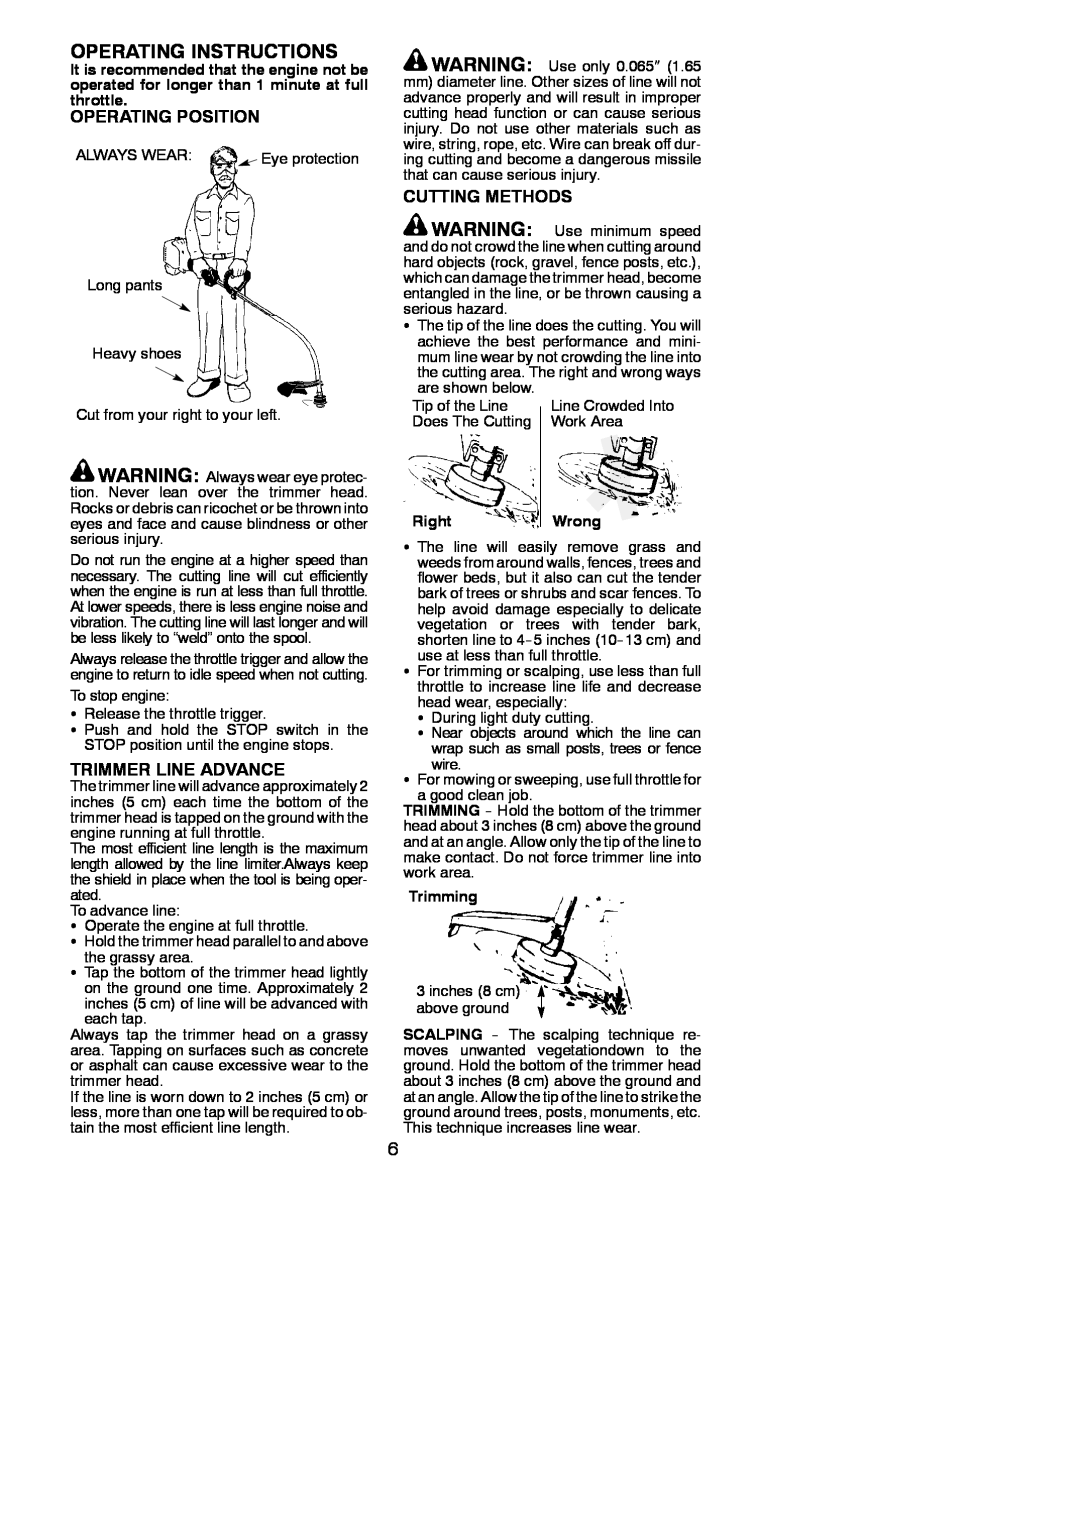 Weed Eater 530163883 Operating Instructions, Operating Position, Trimmer Line Advance, Cutting Methods, RightWrong 